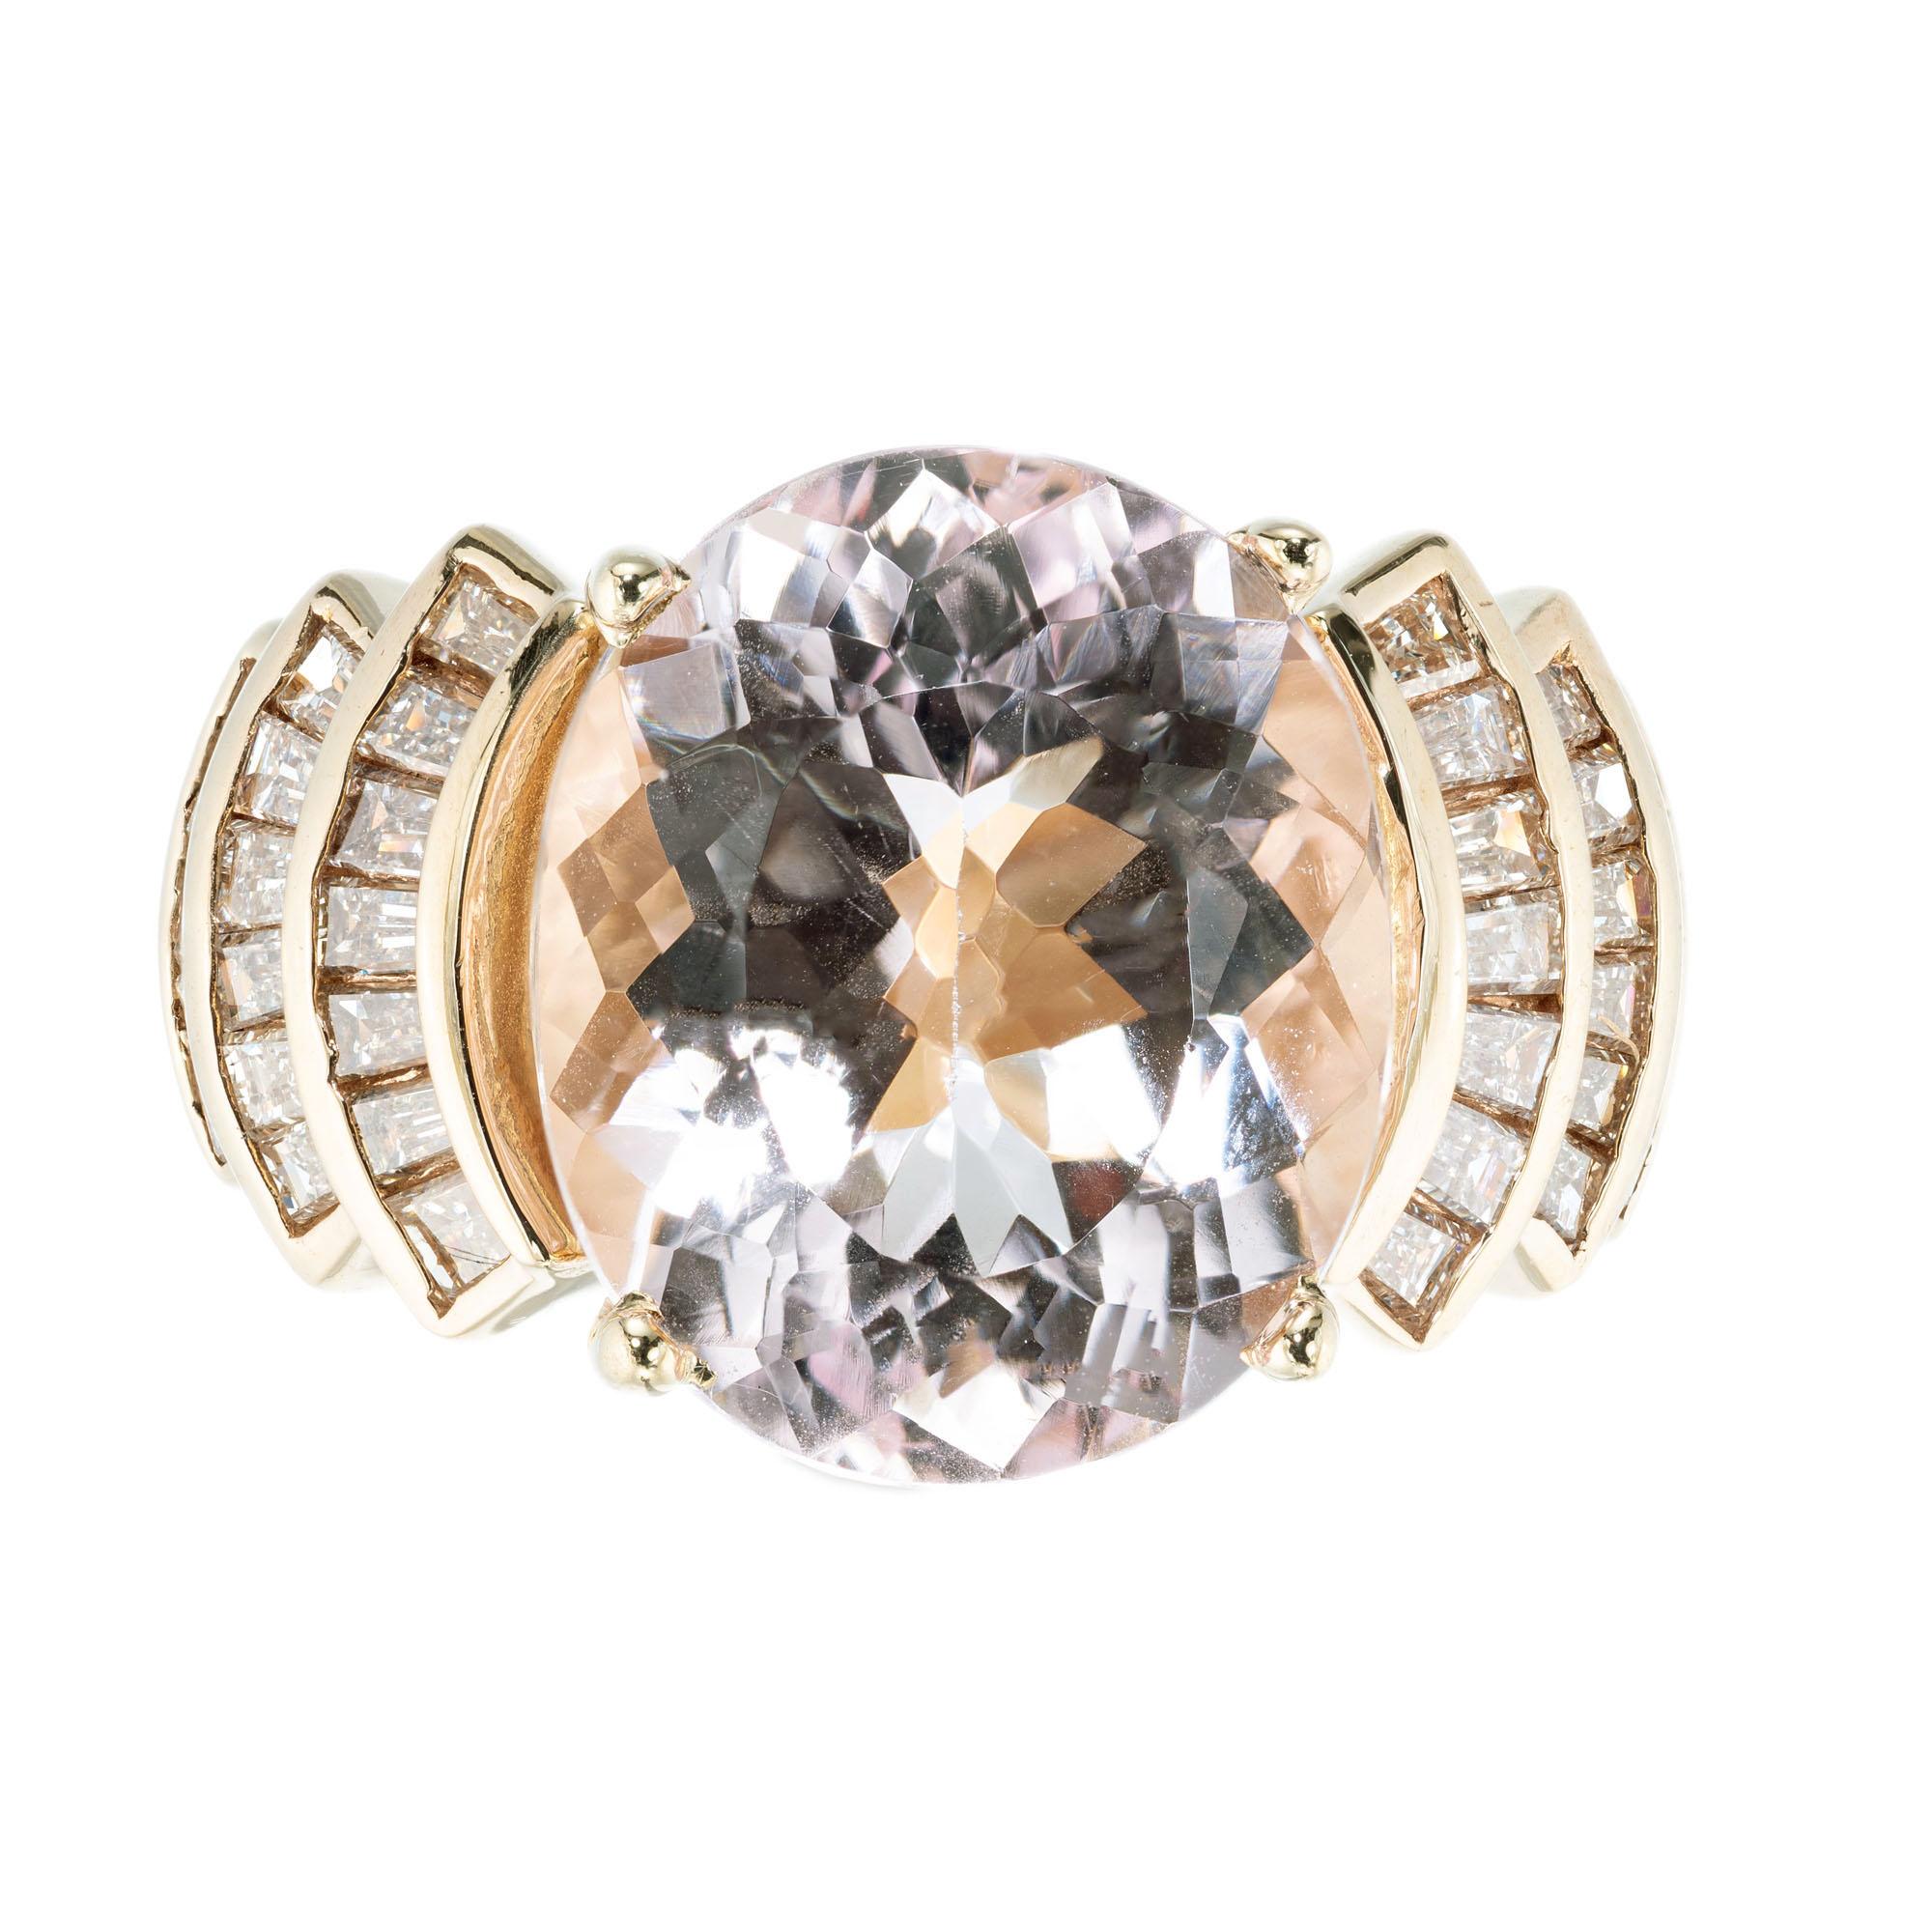 1960's Oval cut pink natural Morganite in a 14k yellow gold cocktail setting with 3 channel set step down sections with baguette diamonds. 

1 oval soft pink Morganite, approx. total weight 8.70cts, VS, 14.81 x 12.02 x 8.24mm
36 tapered baguette